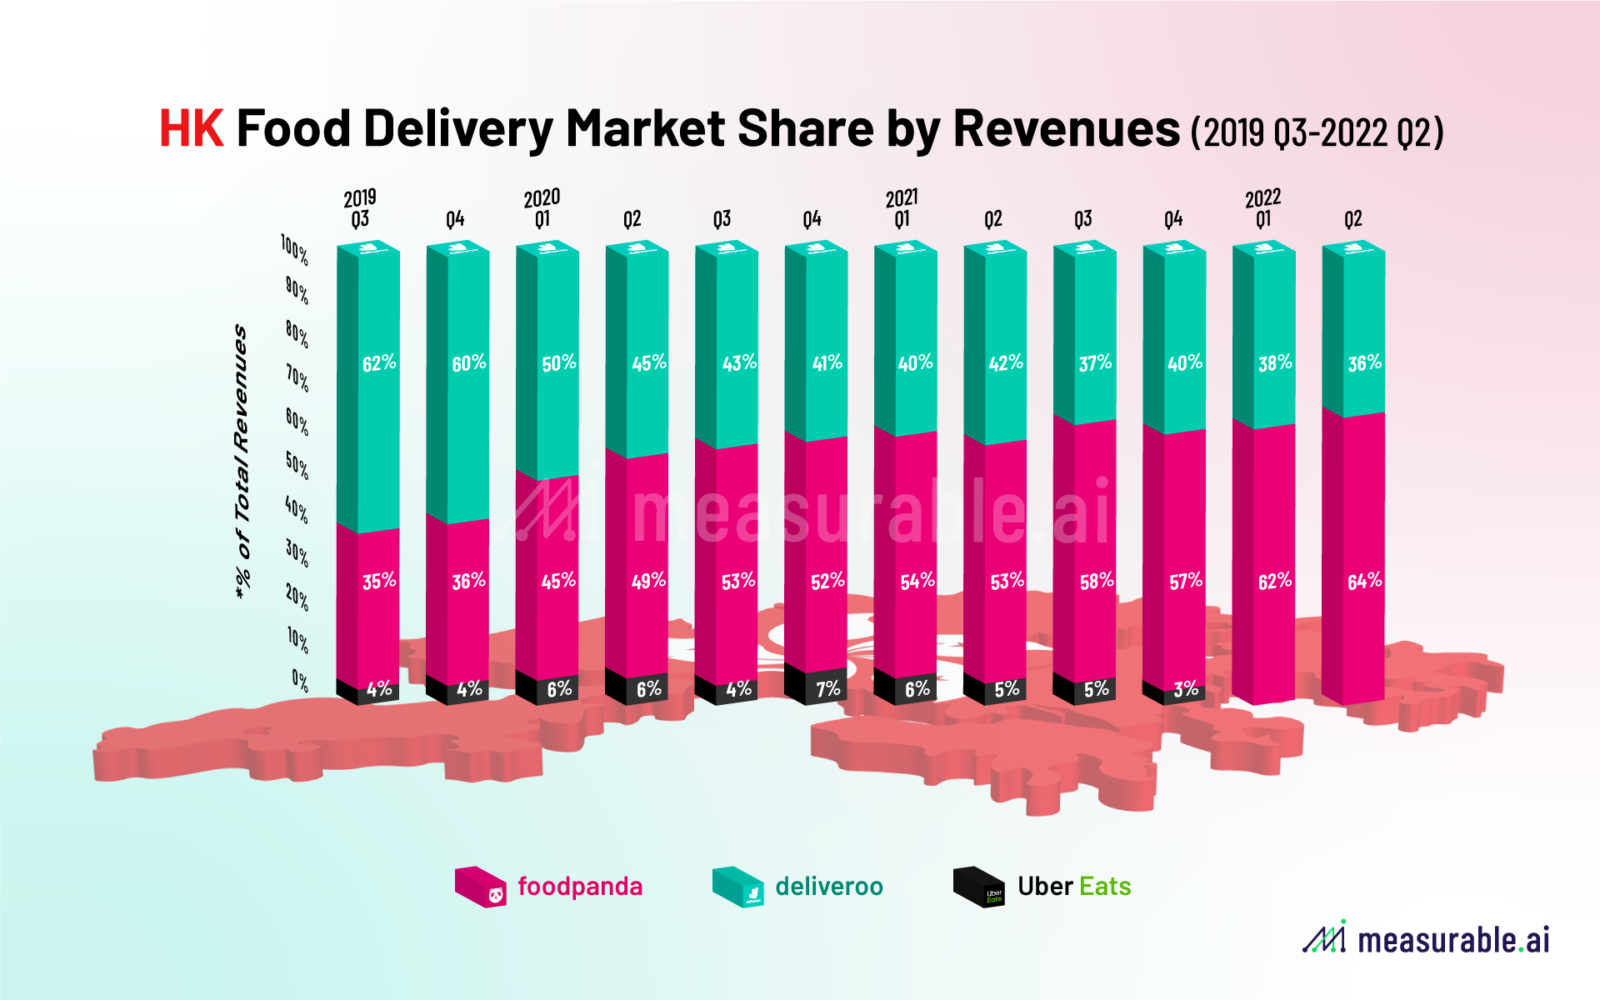 HK Food Delivery Market Share by Revenues